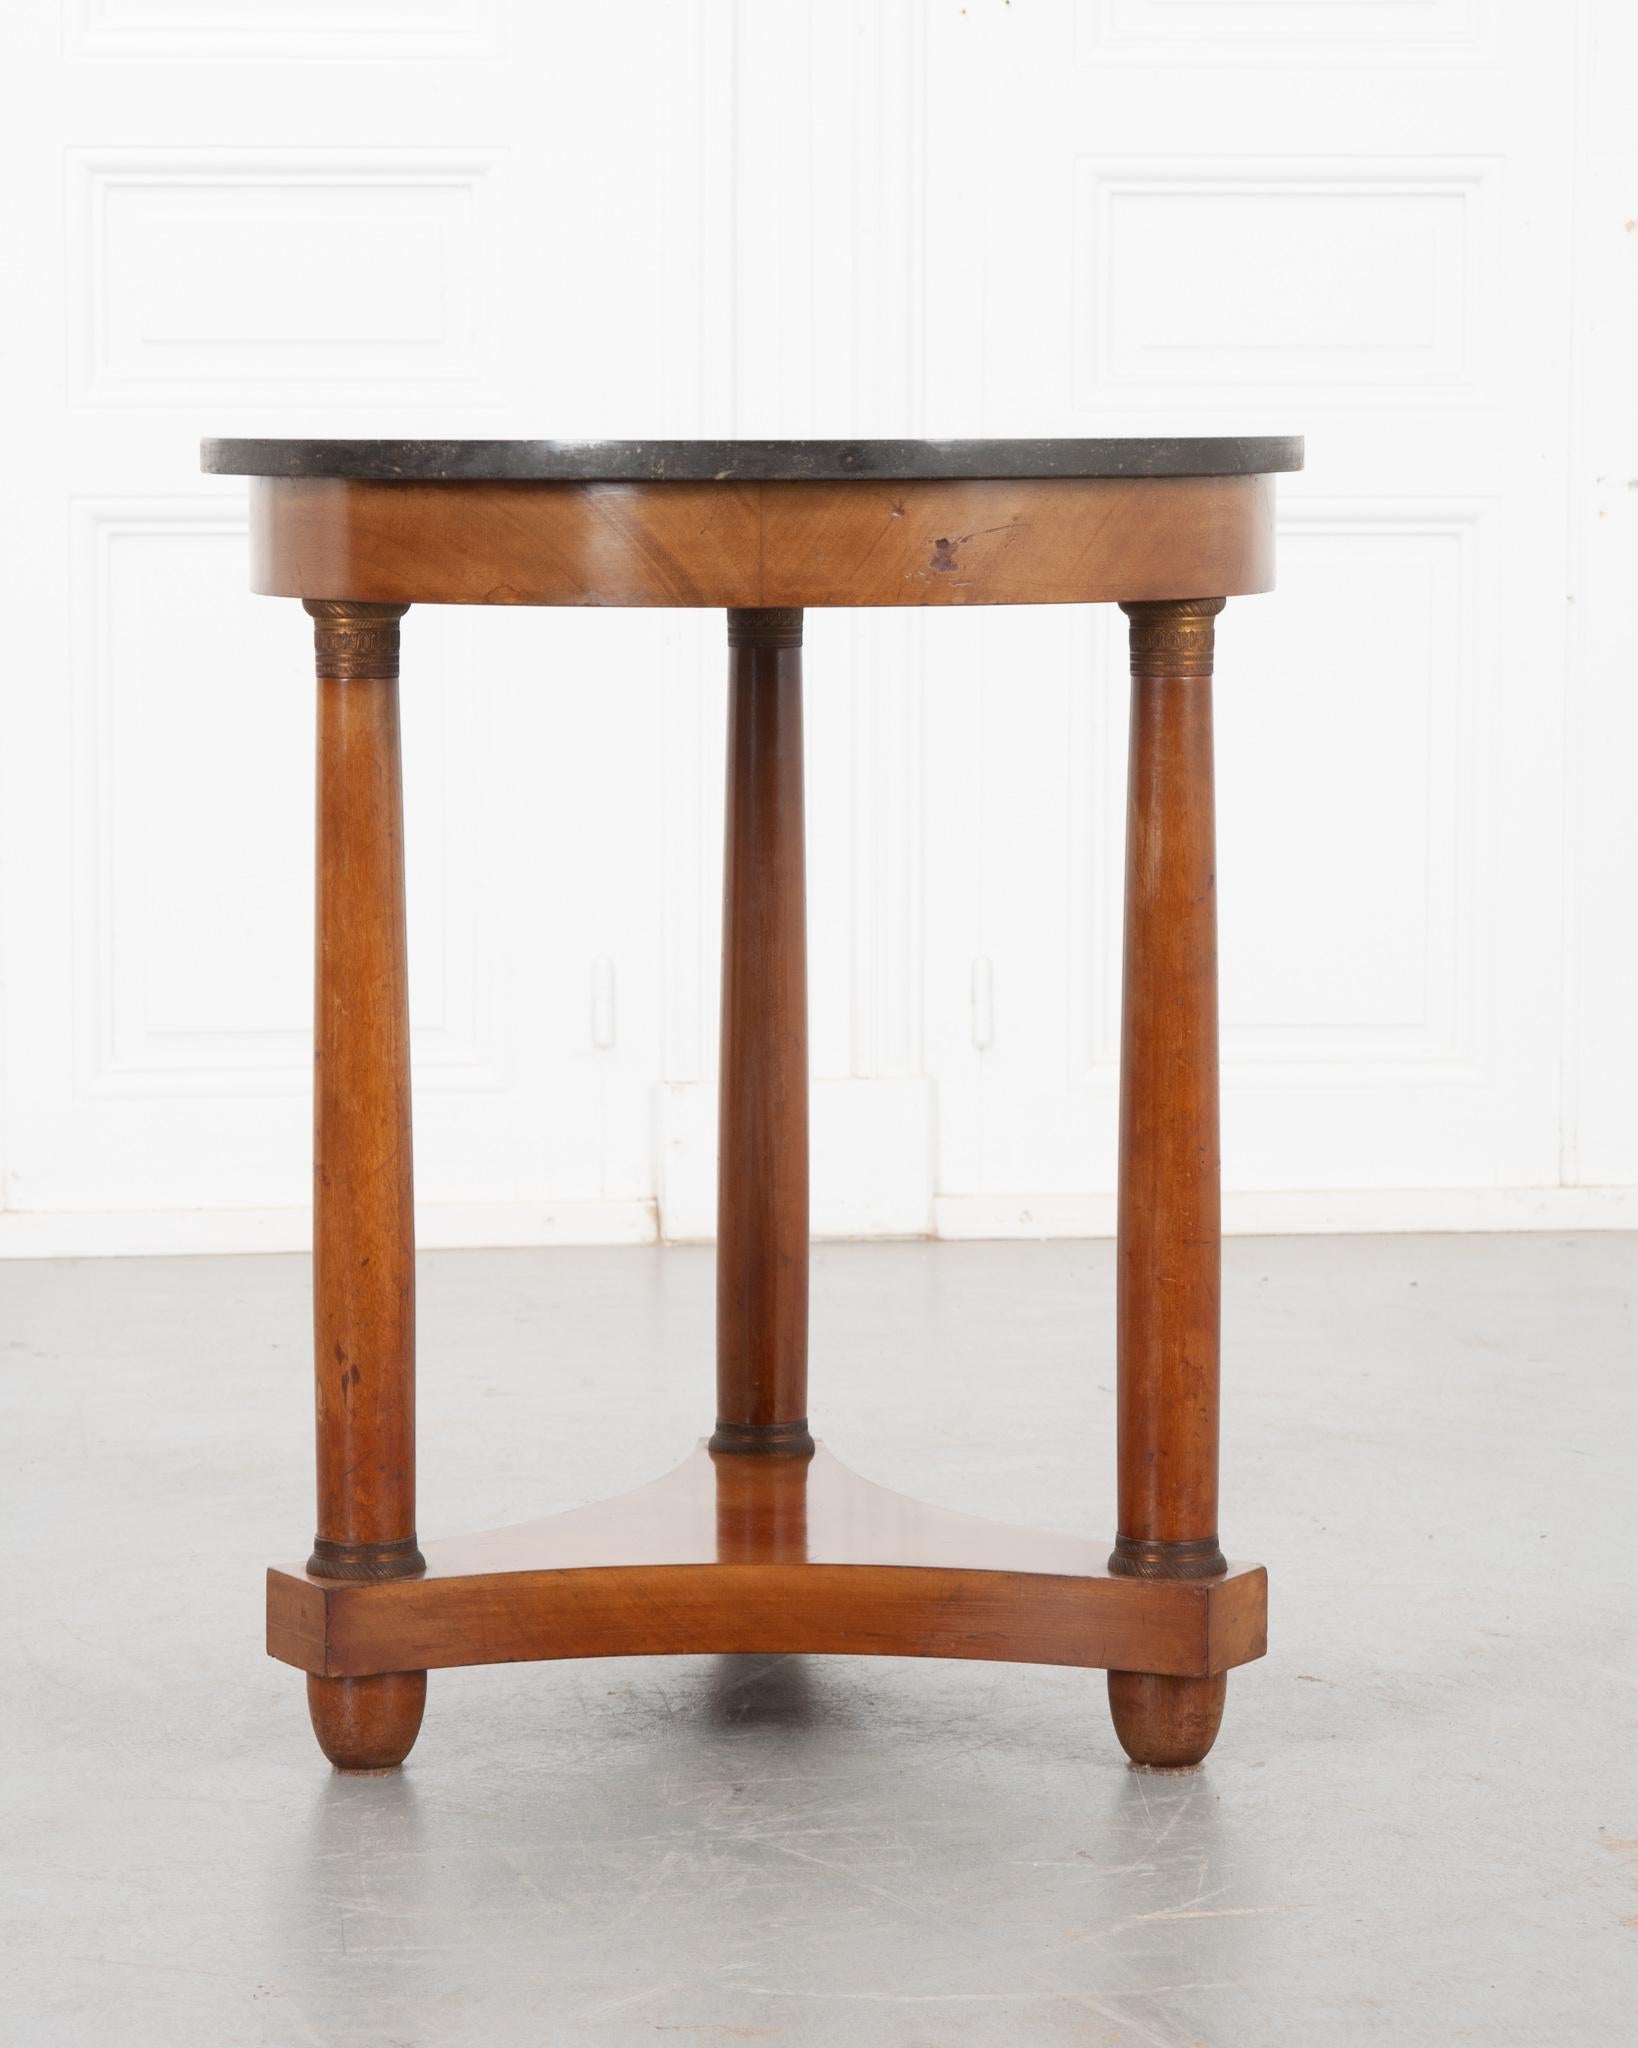 This wonderful 19th century Empire table is the perfect addition to any home decor style. Beautiful, black Belgian granite - in great condition - tops the rich mahogany base. Three turned column-form legs lift the top, each with highly decorative